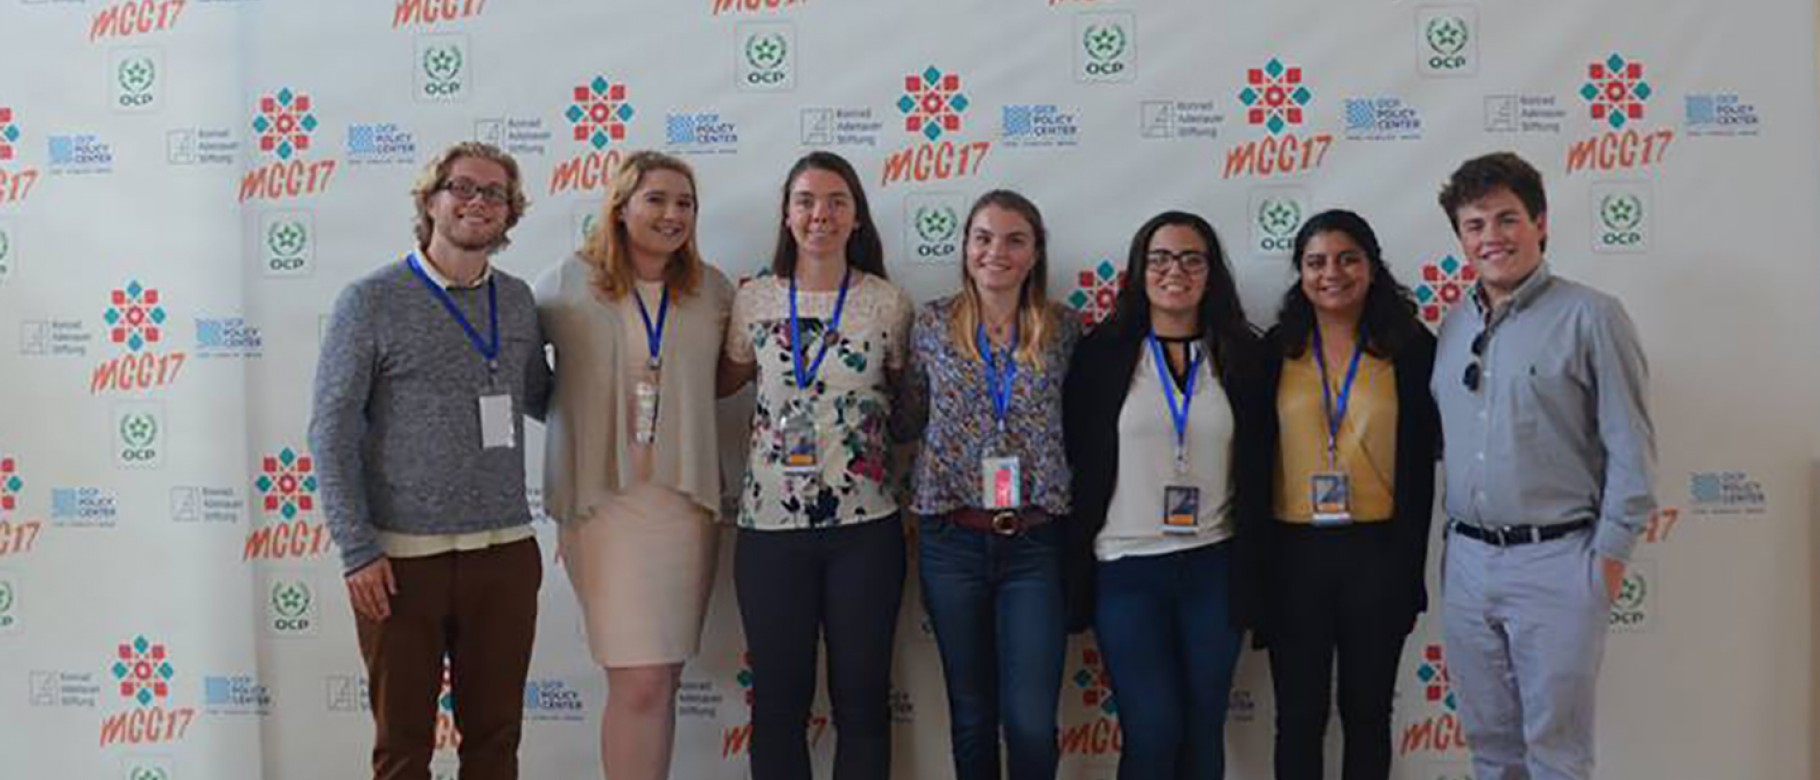 Morocco students at Millennium Campus Conference